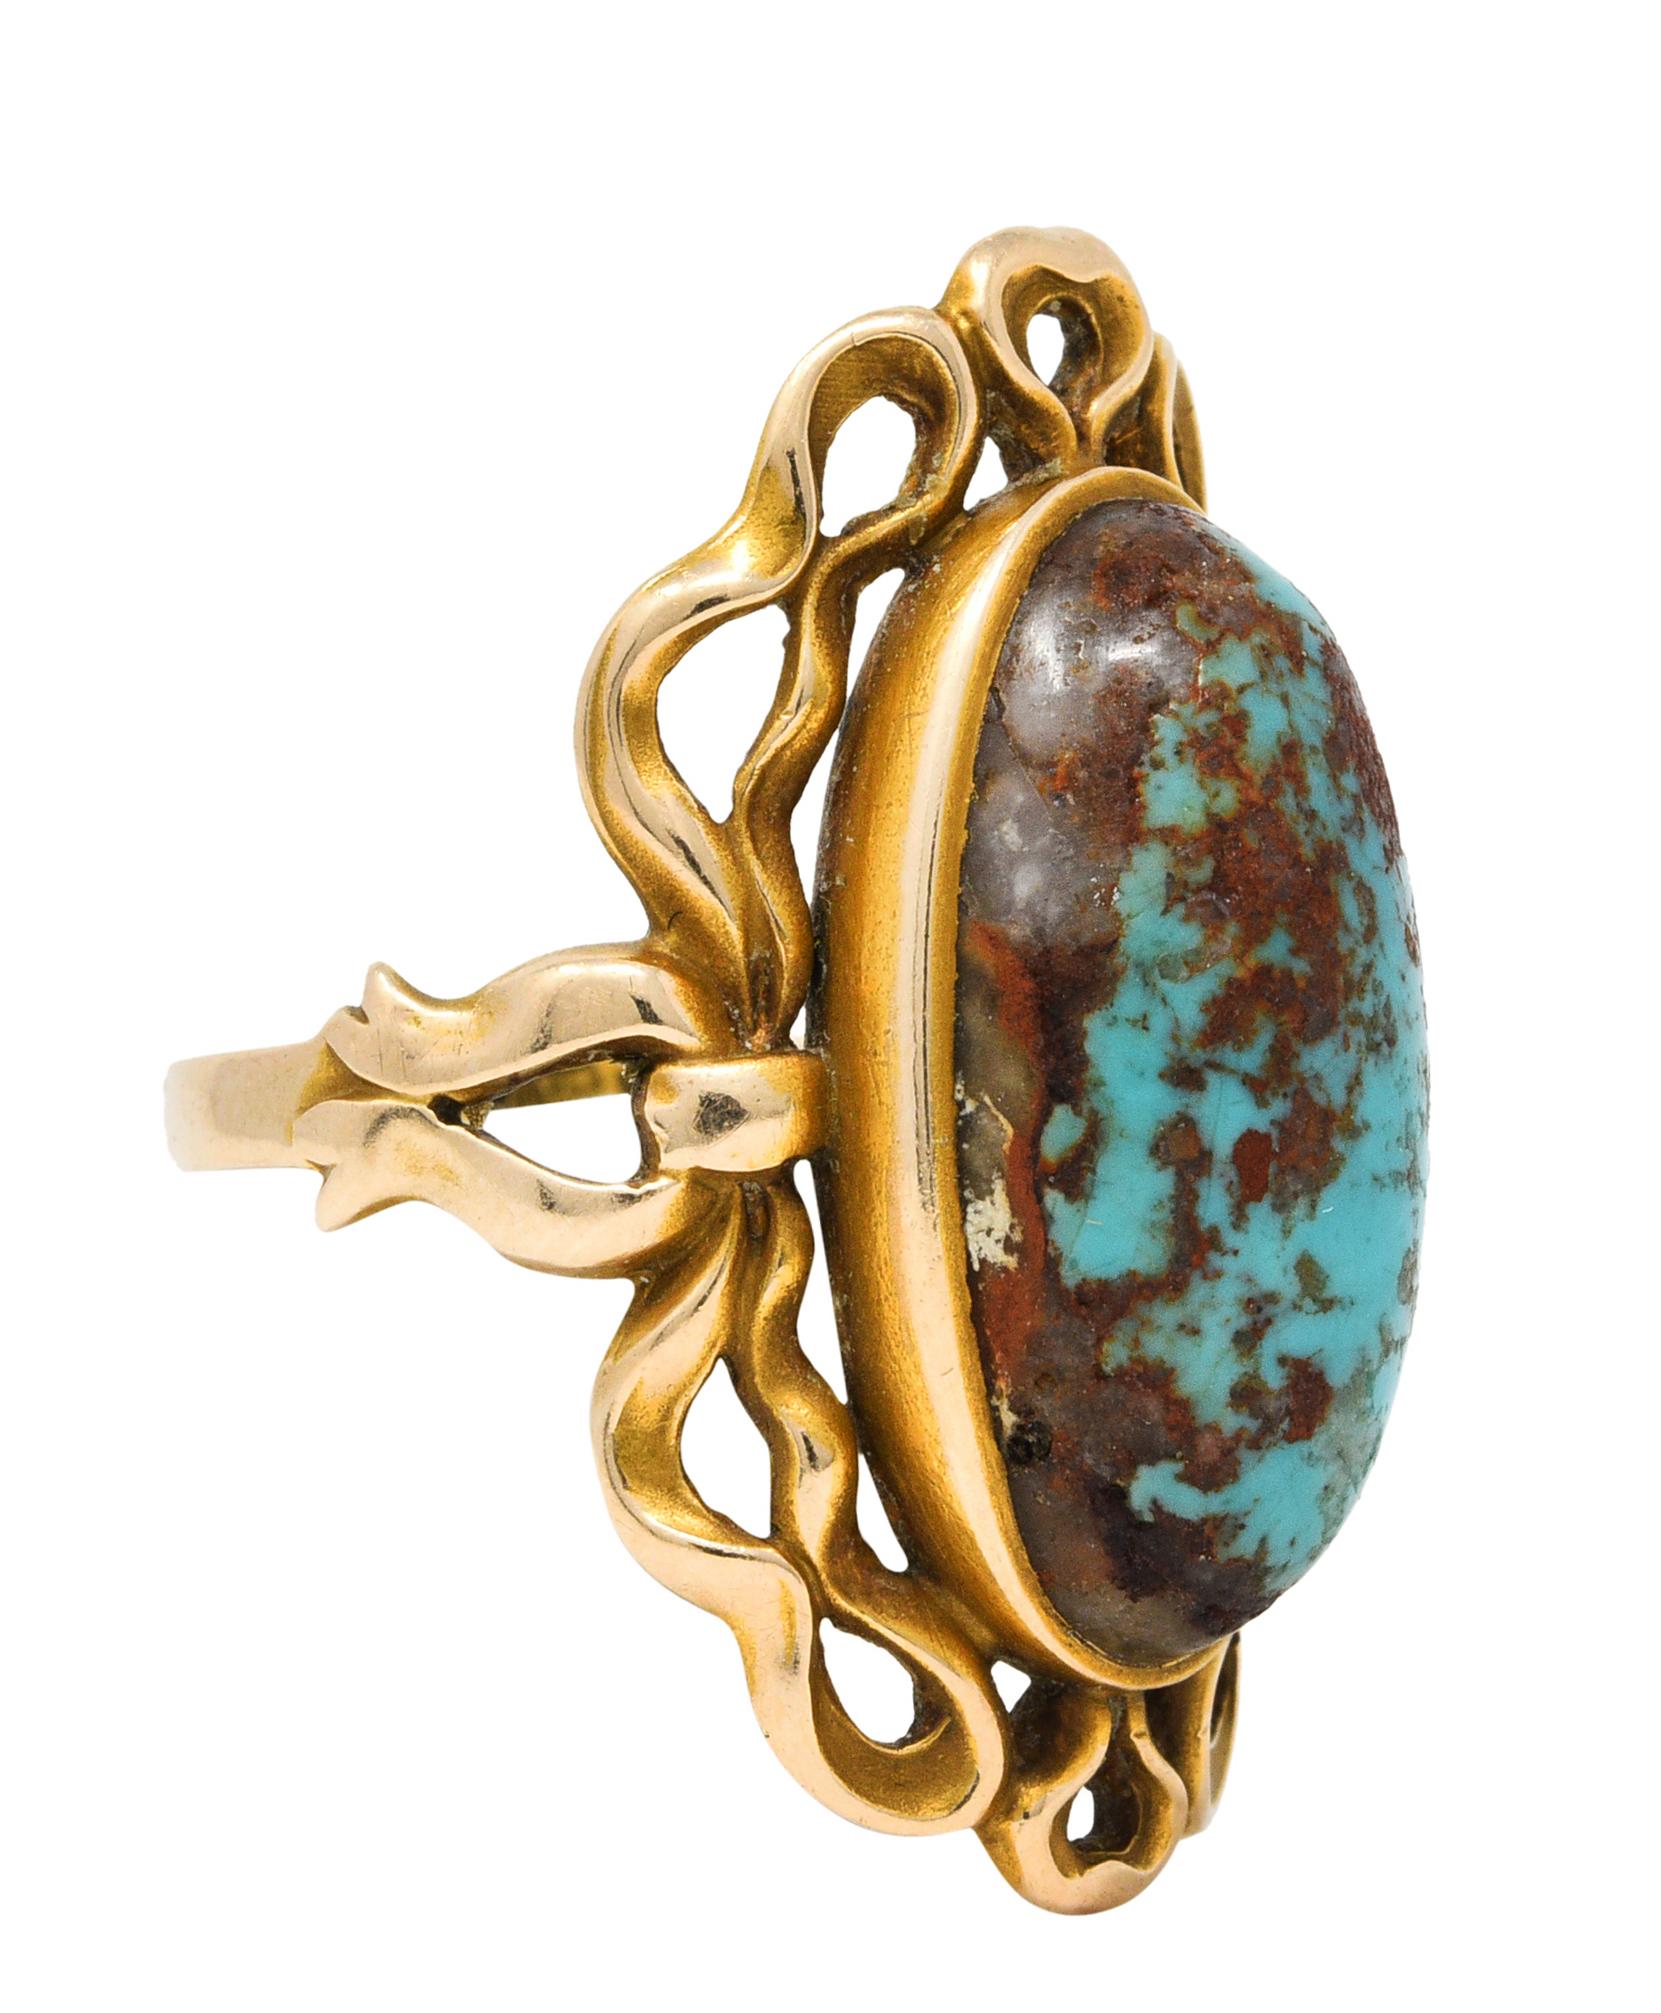 Featuring an elongated oval cabochon of turquoise measuring approximately 18.0 x 8.7 mm

Opaque greenish blue with strong reddish brown mottling and a moderate amount of exposed matrix

Bezel set with a fancifully whiplashed ribboned surround